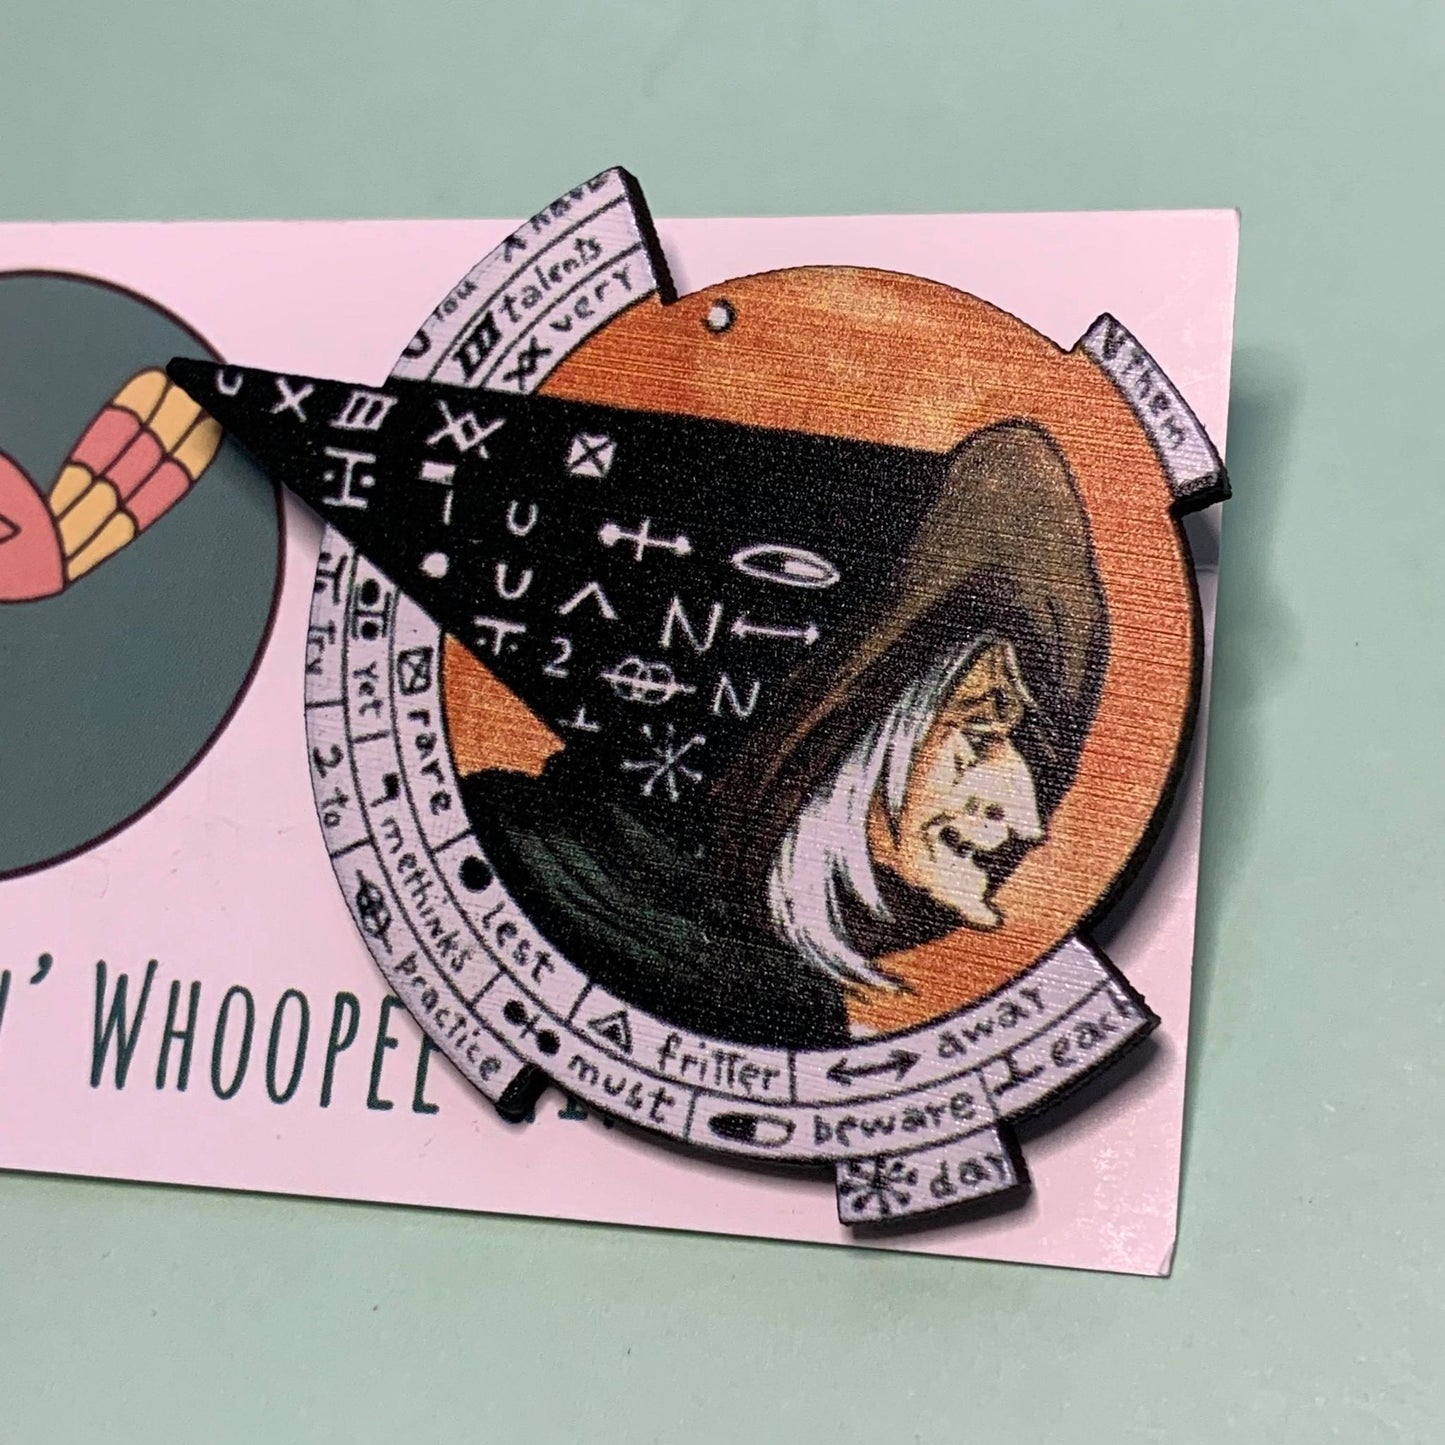 MAKIN' WHOOPEE - "Casting Spells" Witch Halloween Brooch